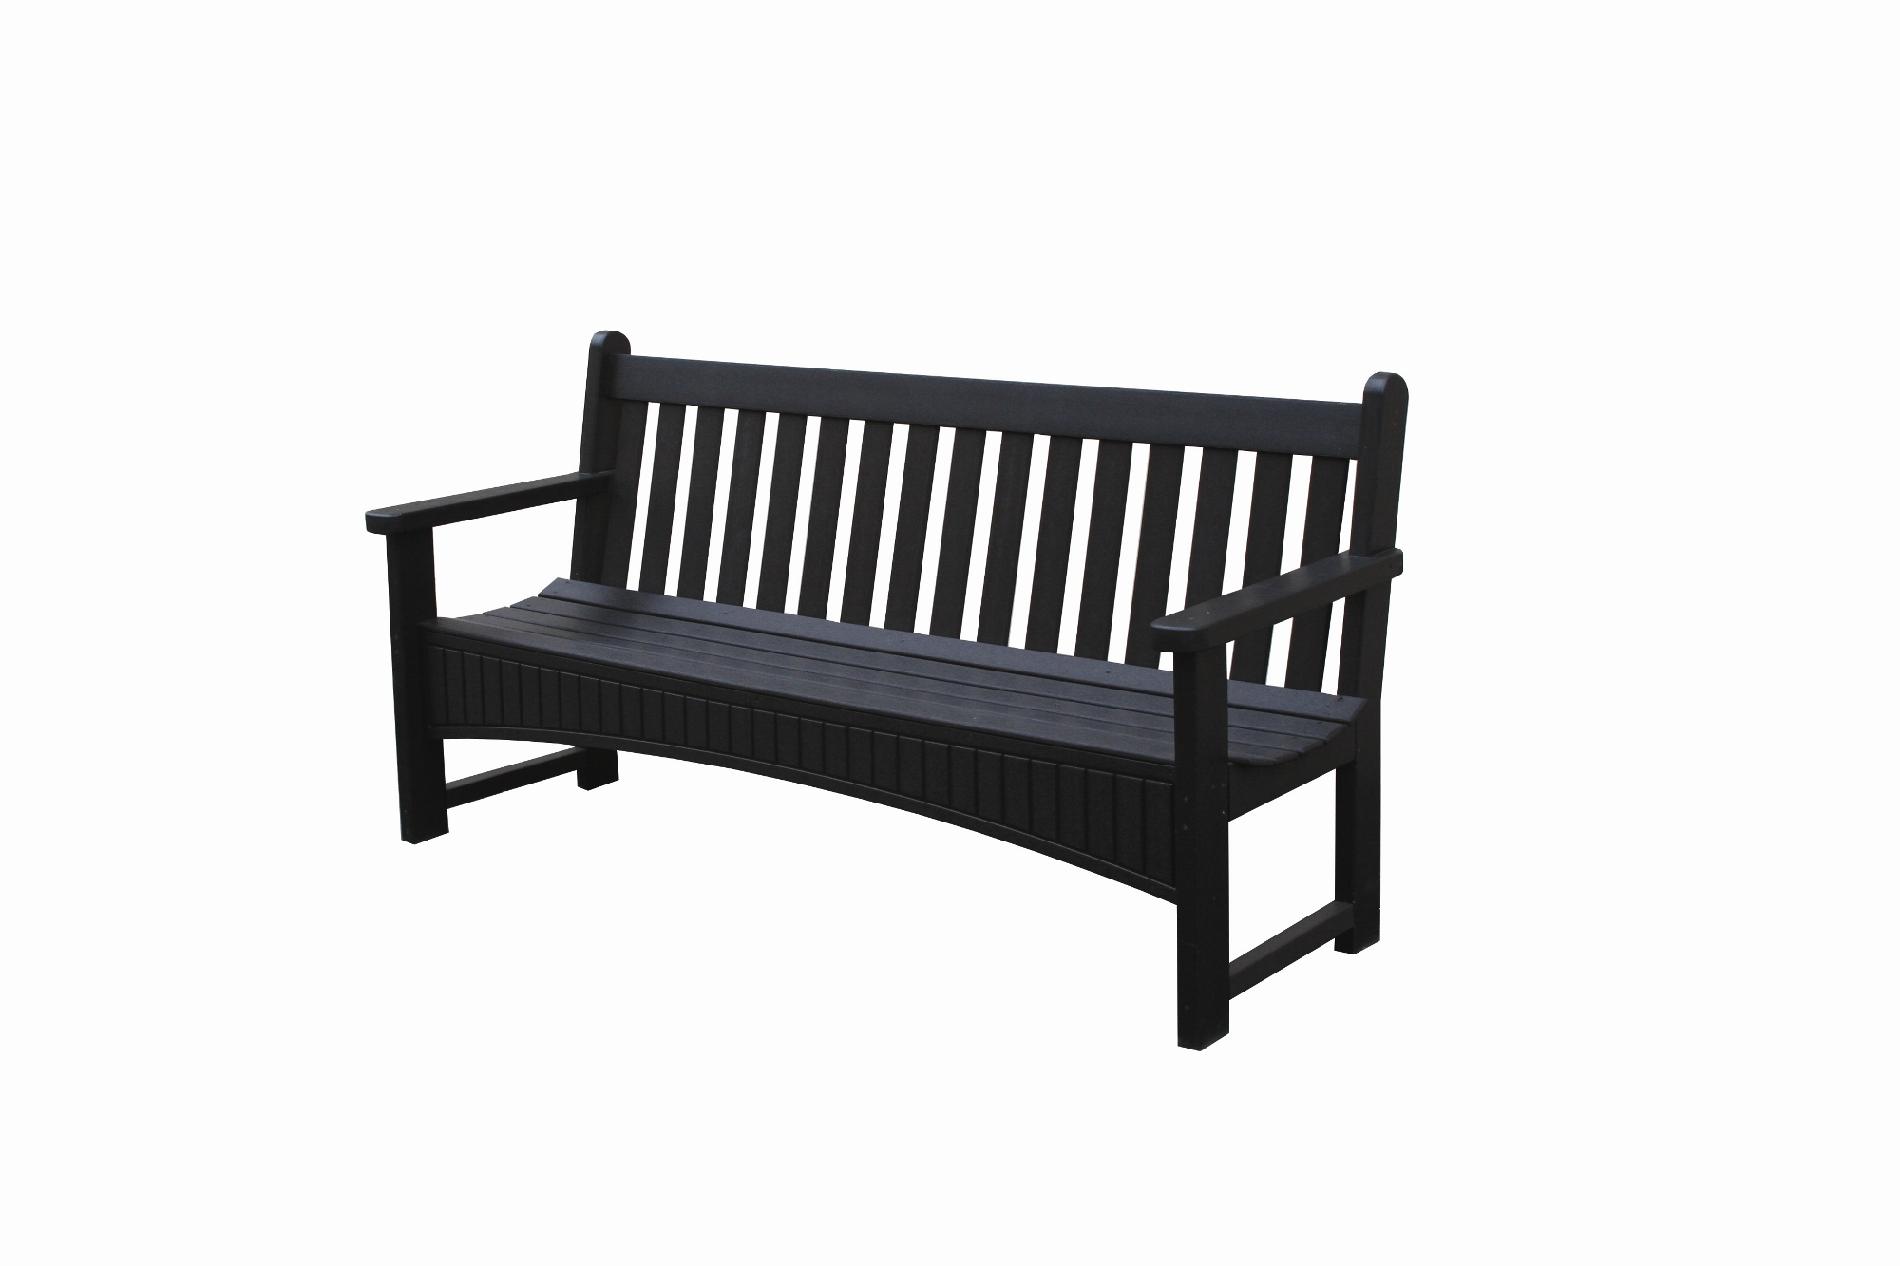 6' Heritage Commercial Grade Bench